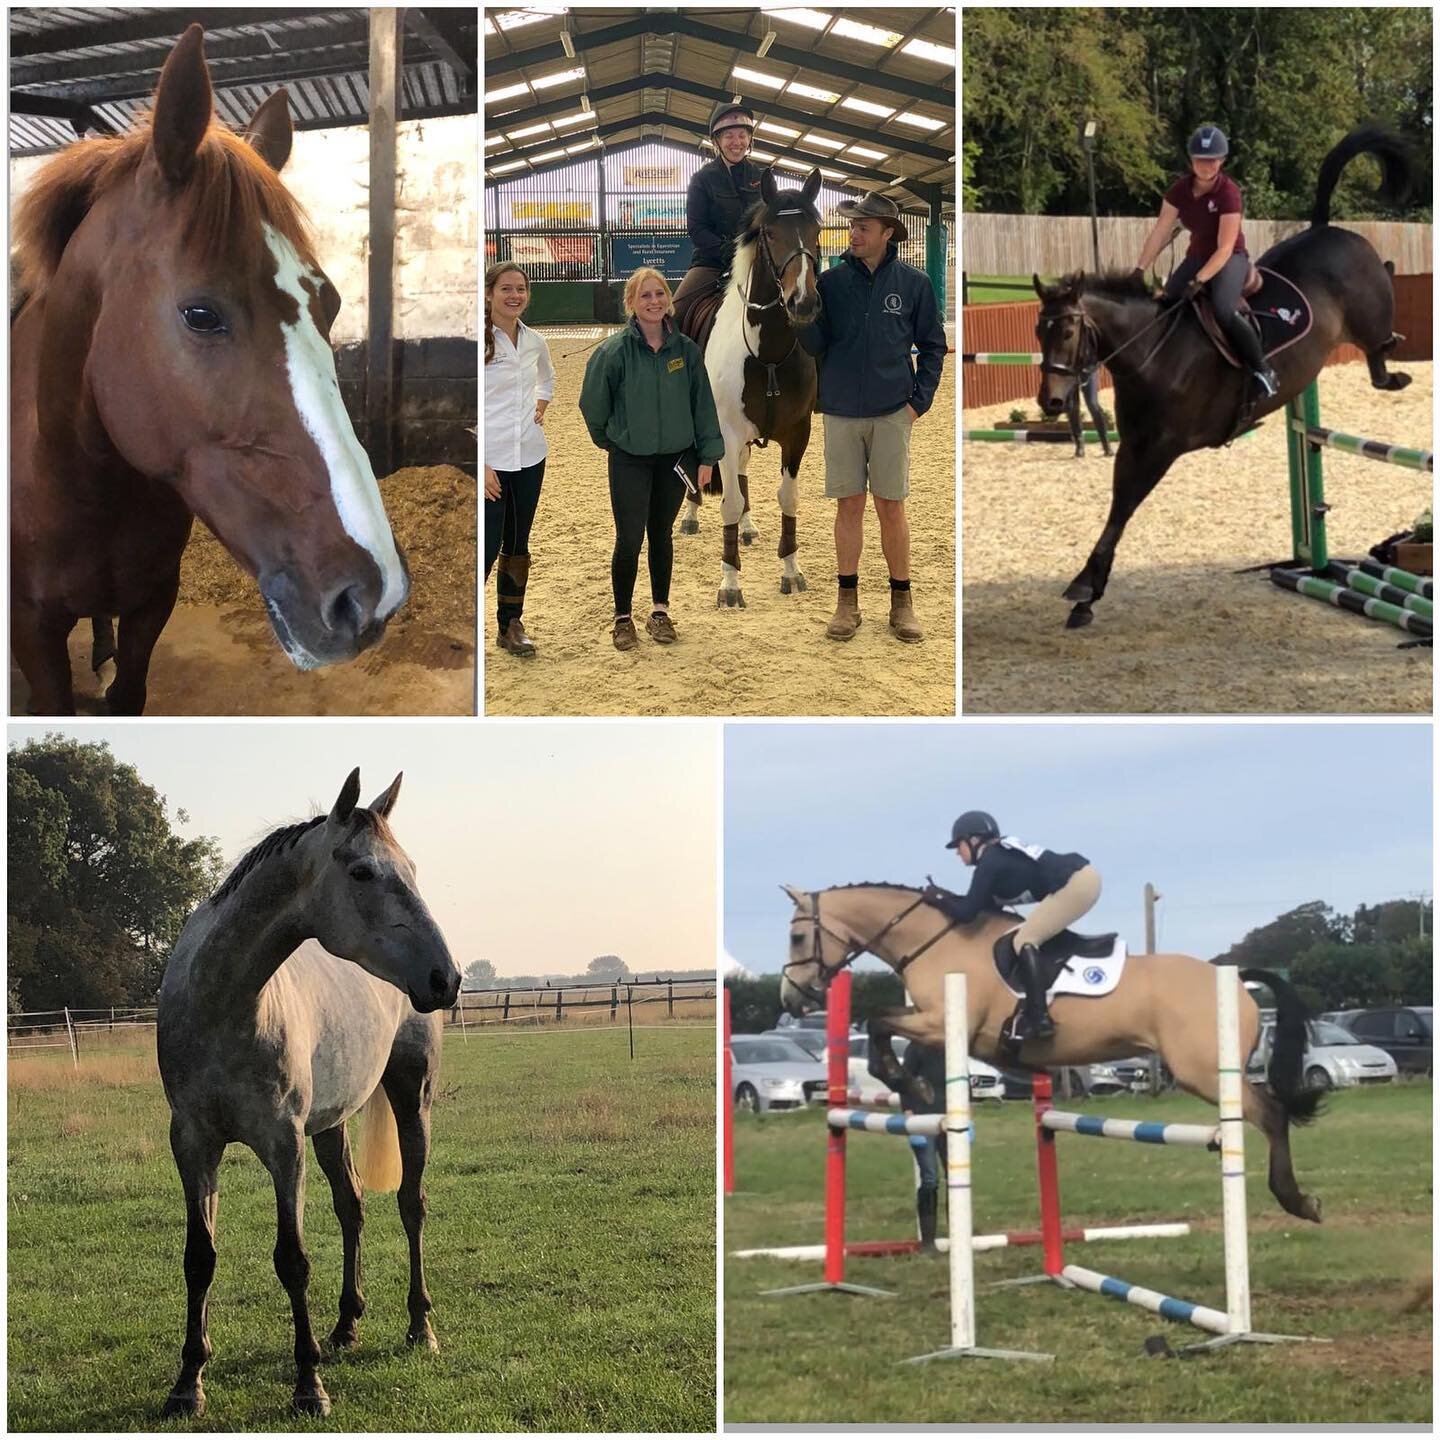 🌟 NEW BLOG 🌟

I am lucky to work with two fantastic professional riders. You may have seen them appear in many of my posts and stories but I thought it would be great for you to learn more about their journeys with their horses via my new blog!

Th